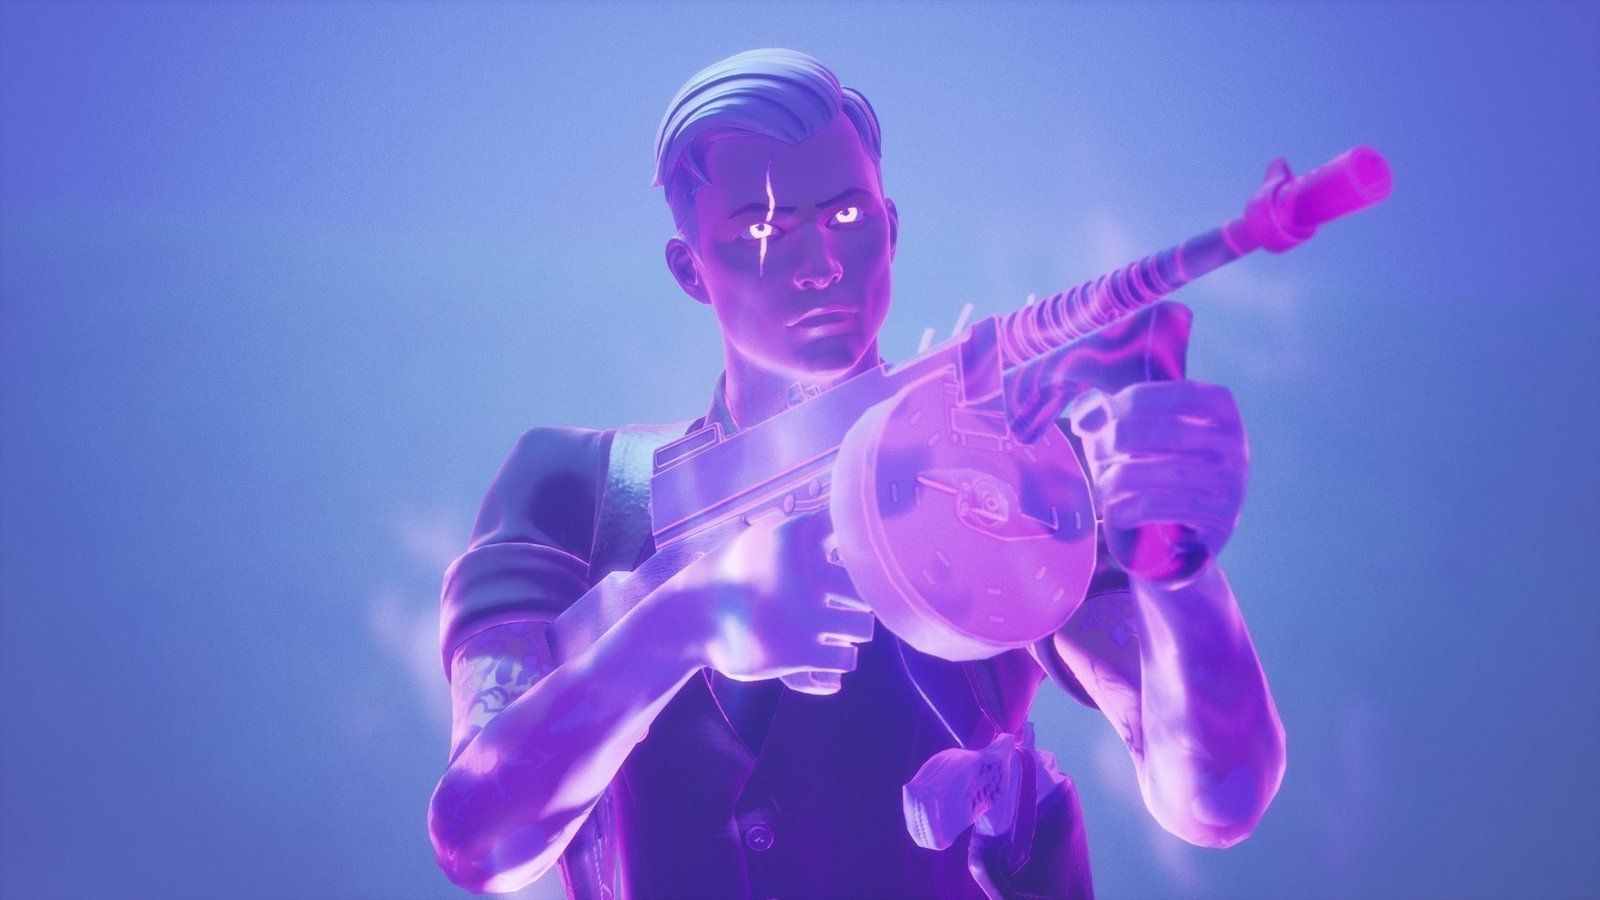 Petition · Petition to add Shadow Midas as a Fortnite skin · Change.org